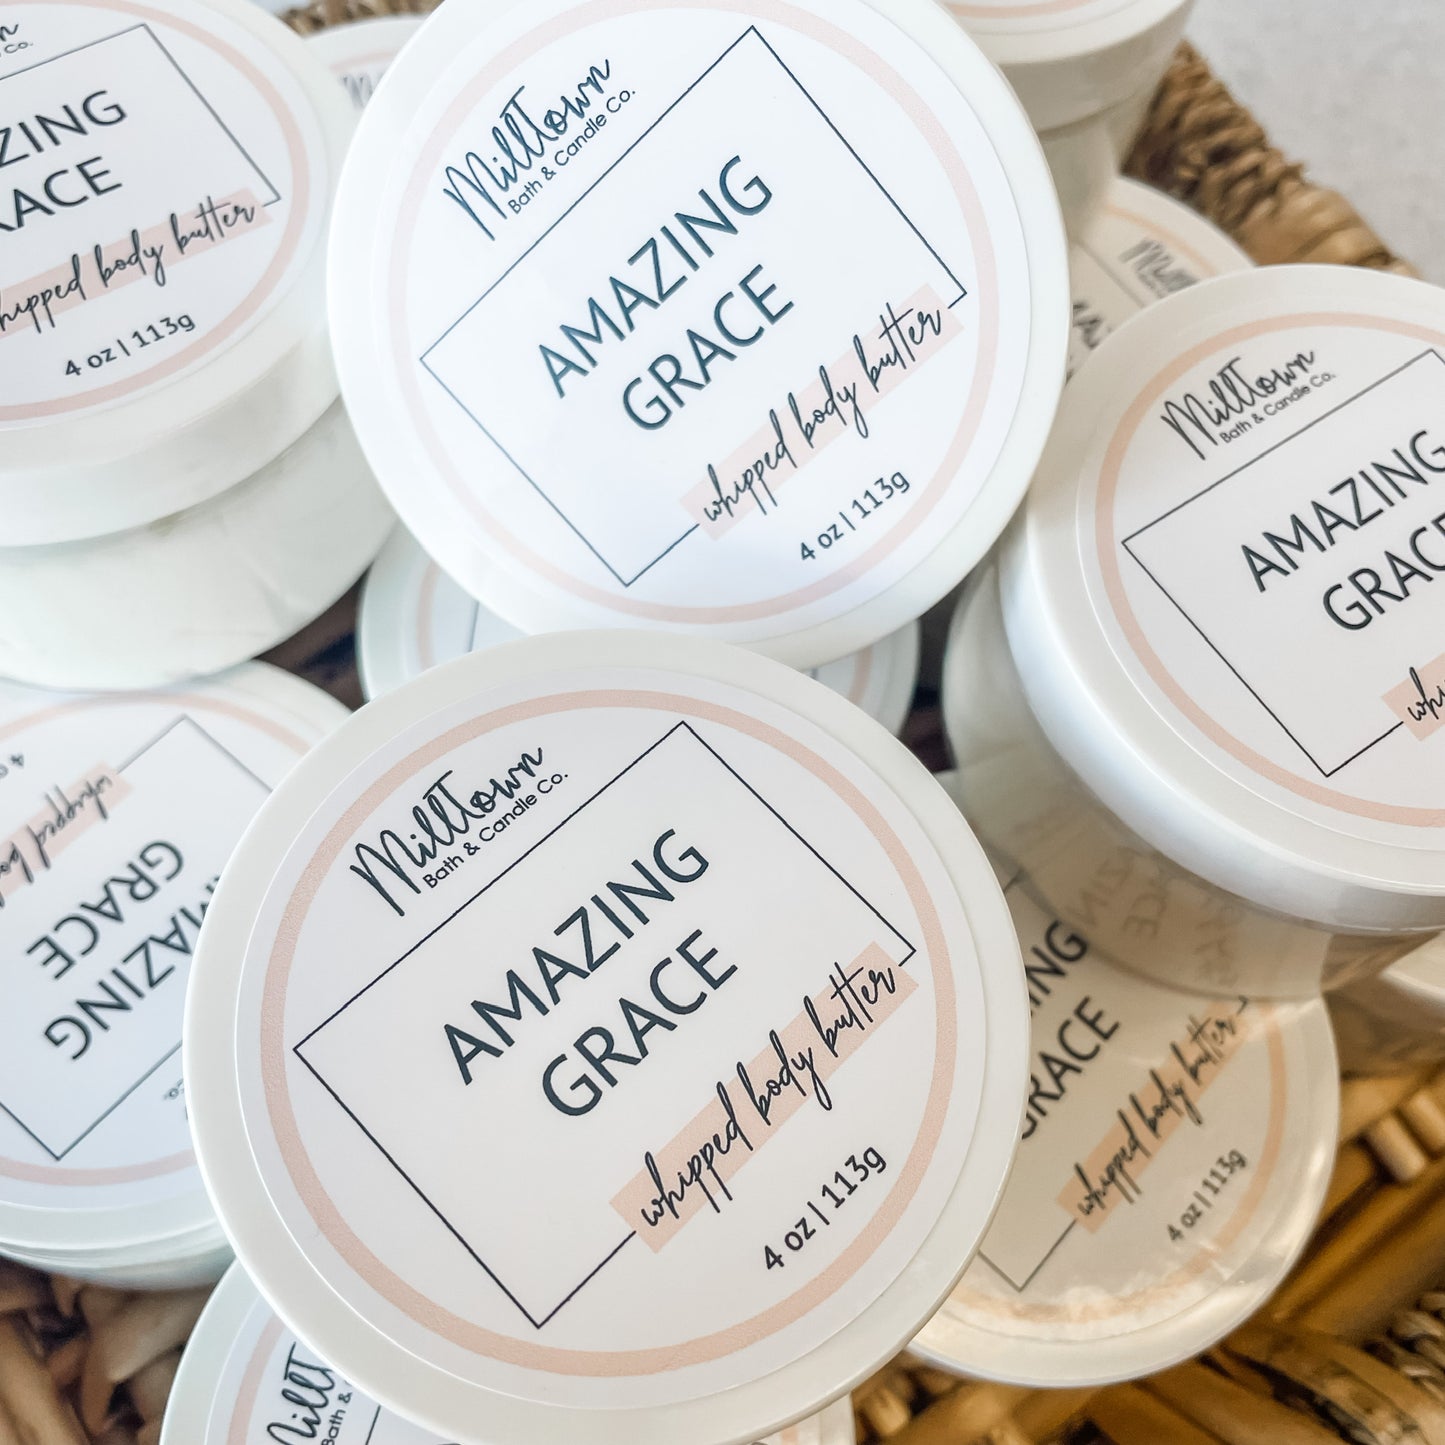 Amazing Grace Whipped Body Butter